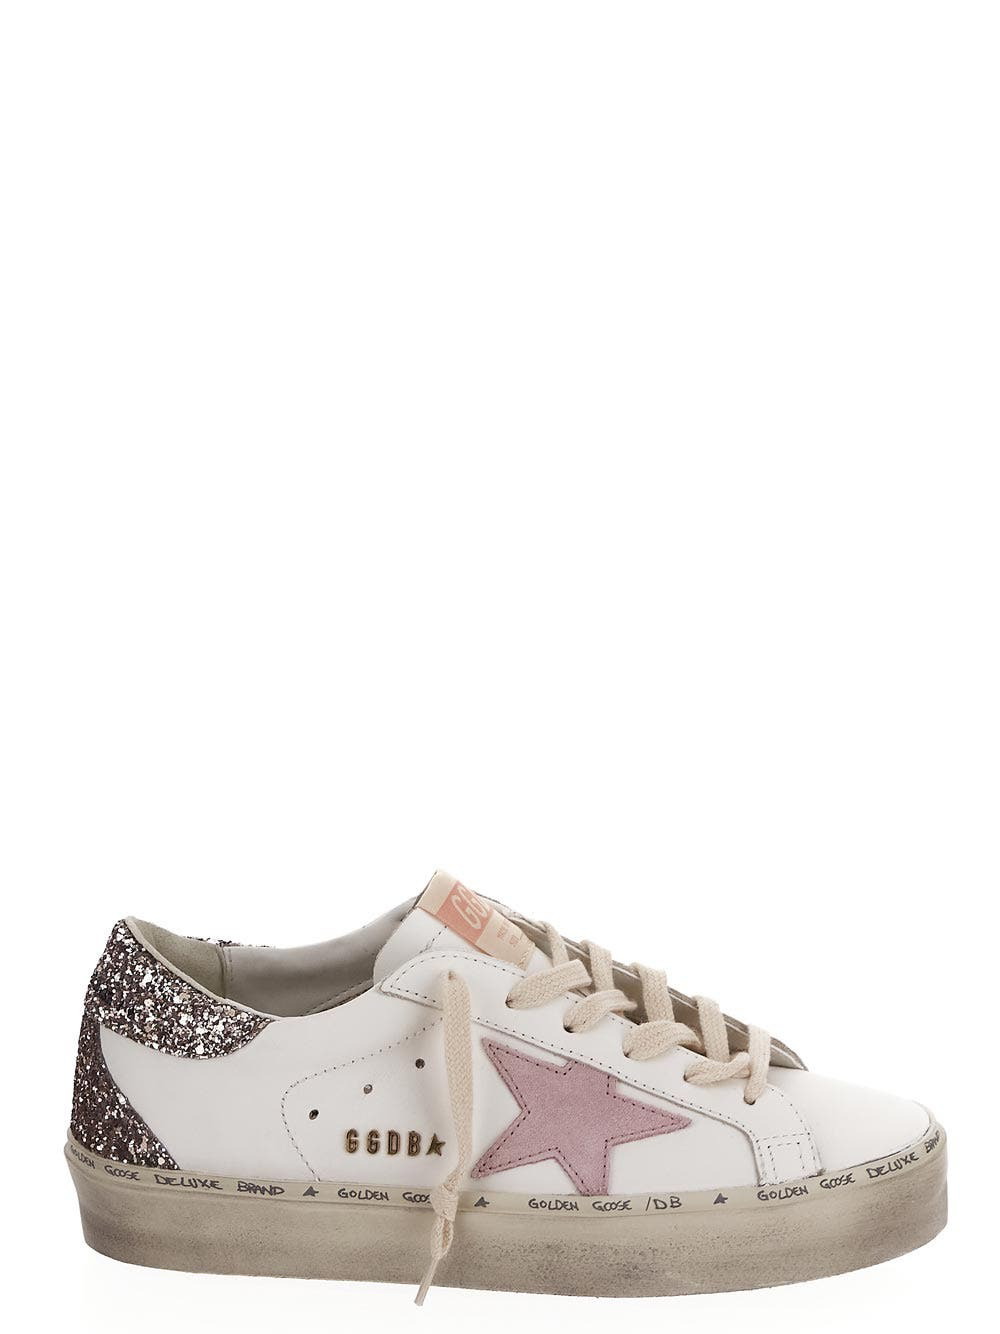 Golden Goose White and Silver Hi-Star Sneakers Golden Goose Deluxe Brand